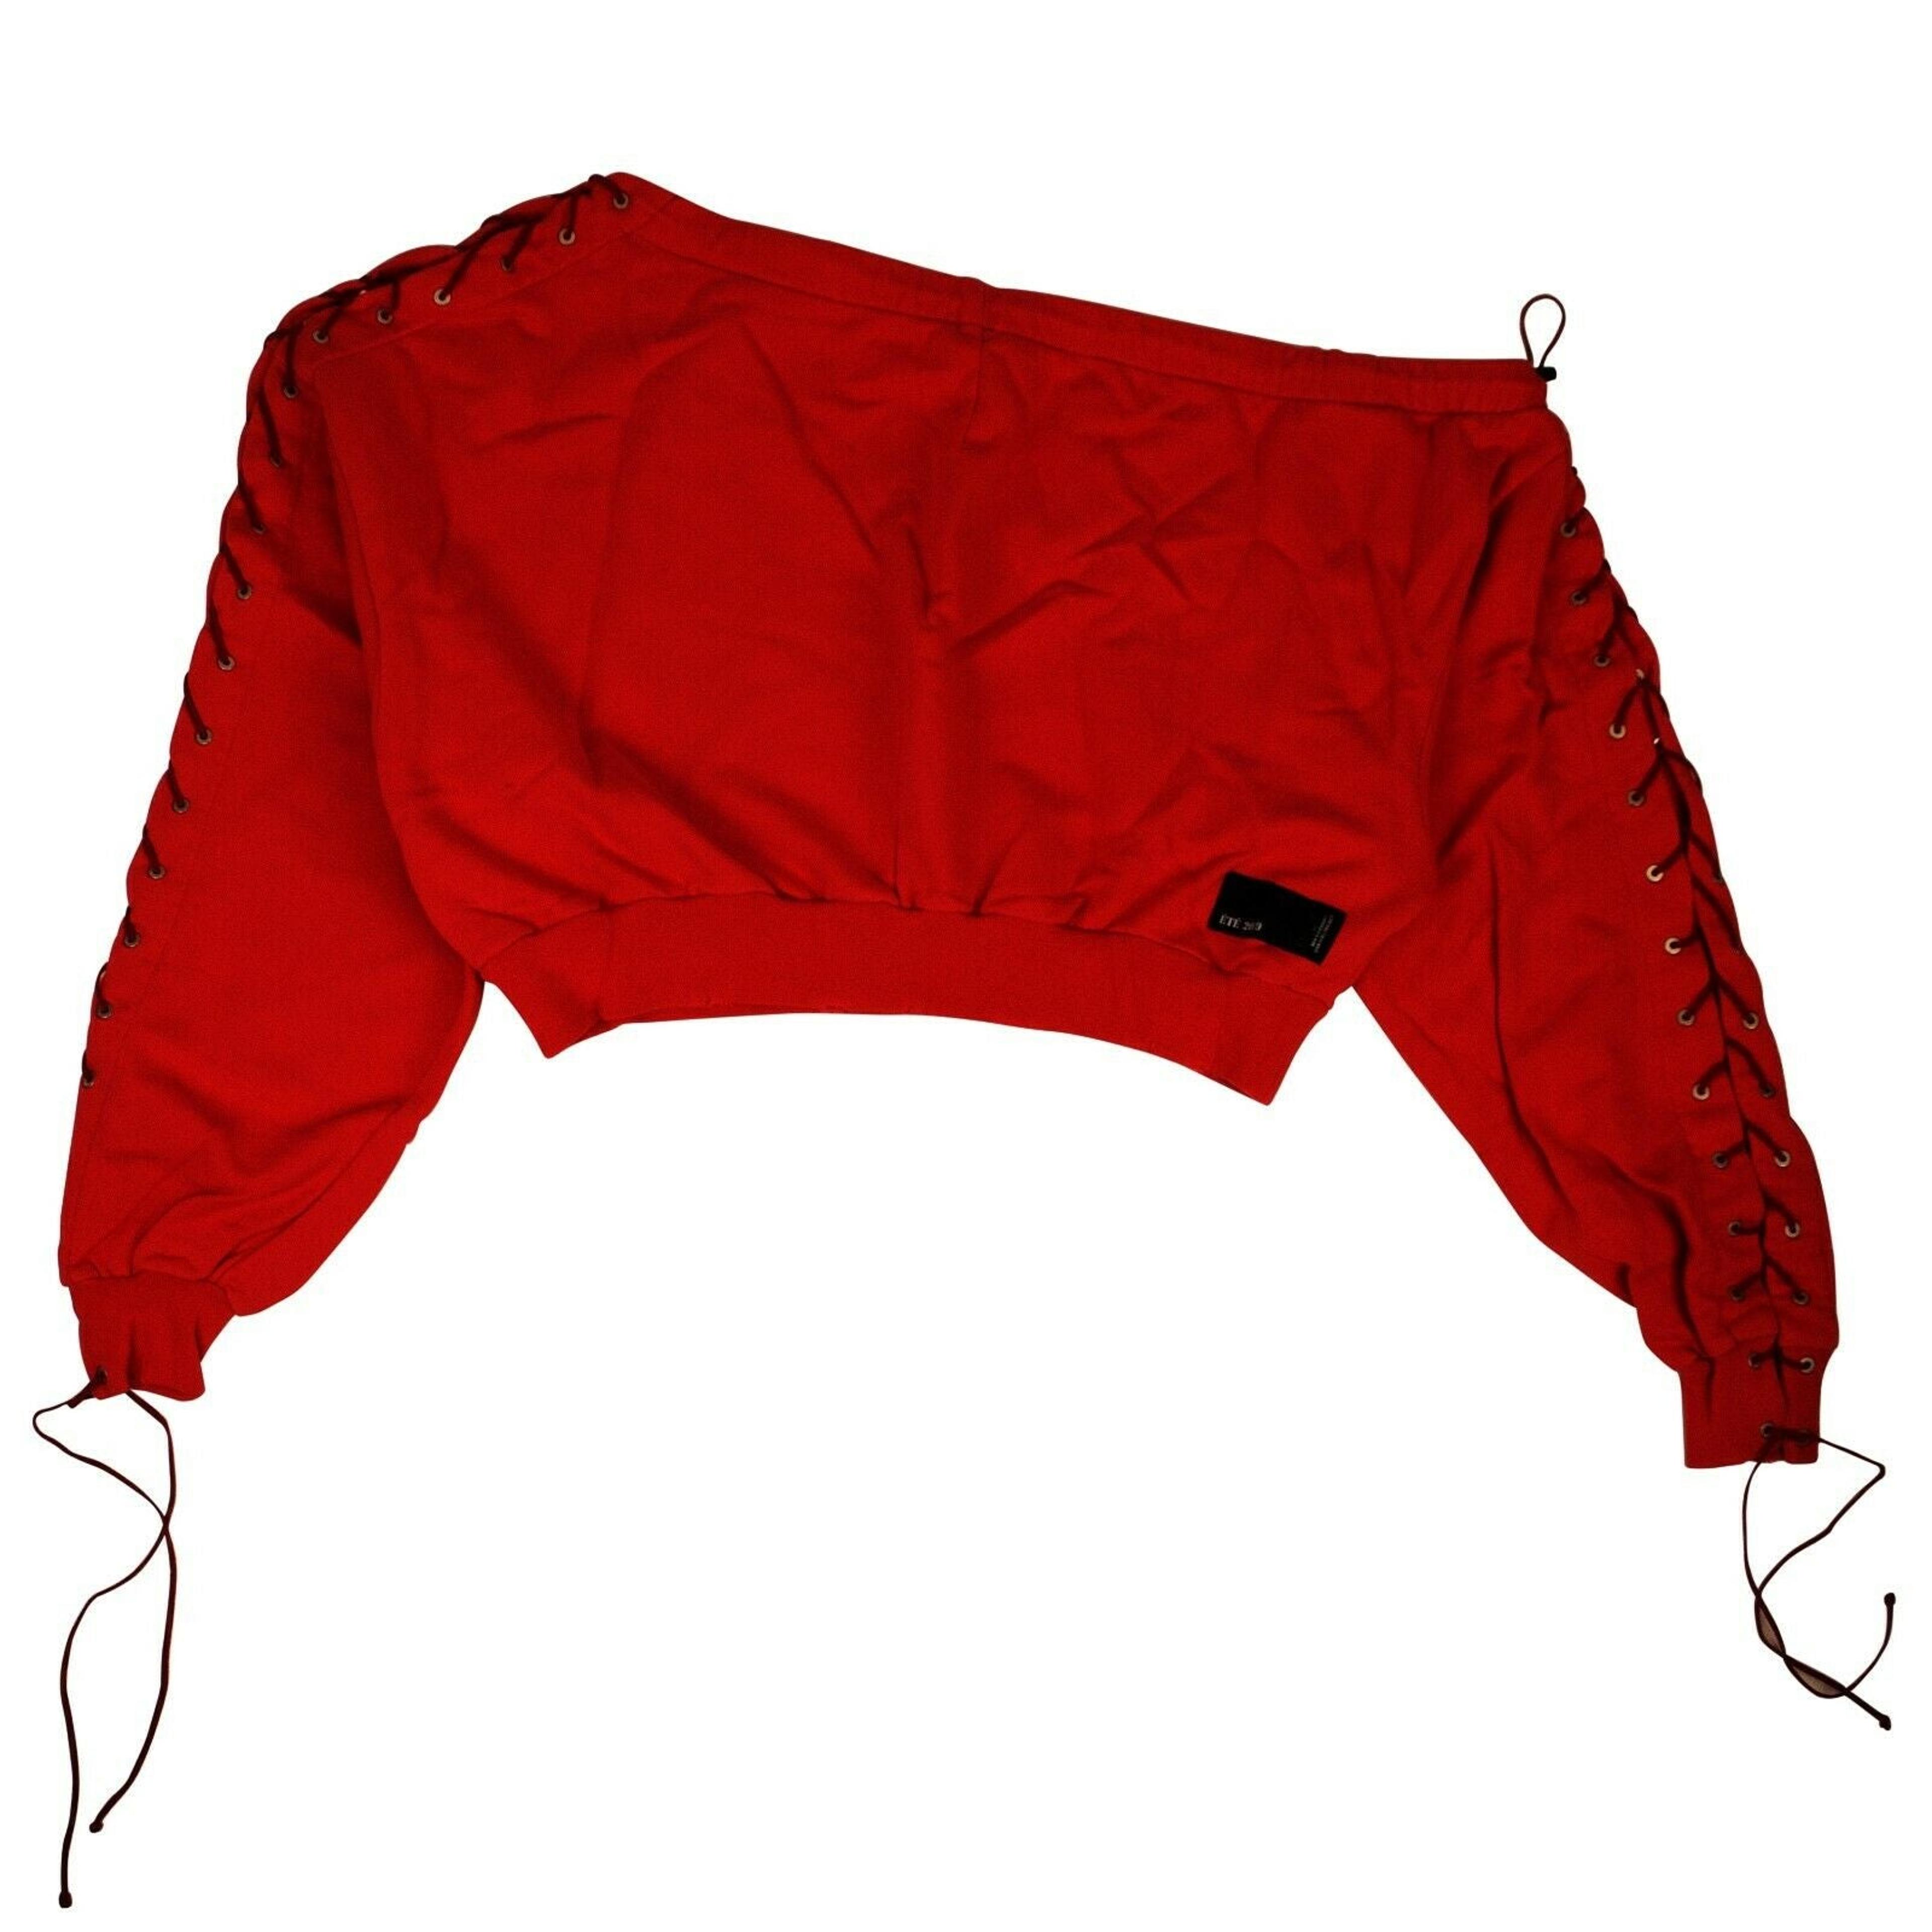 Alternate View 1 of Unravel Project Off The Shoulder Sweatshirt - Red